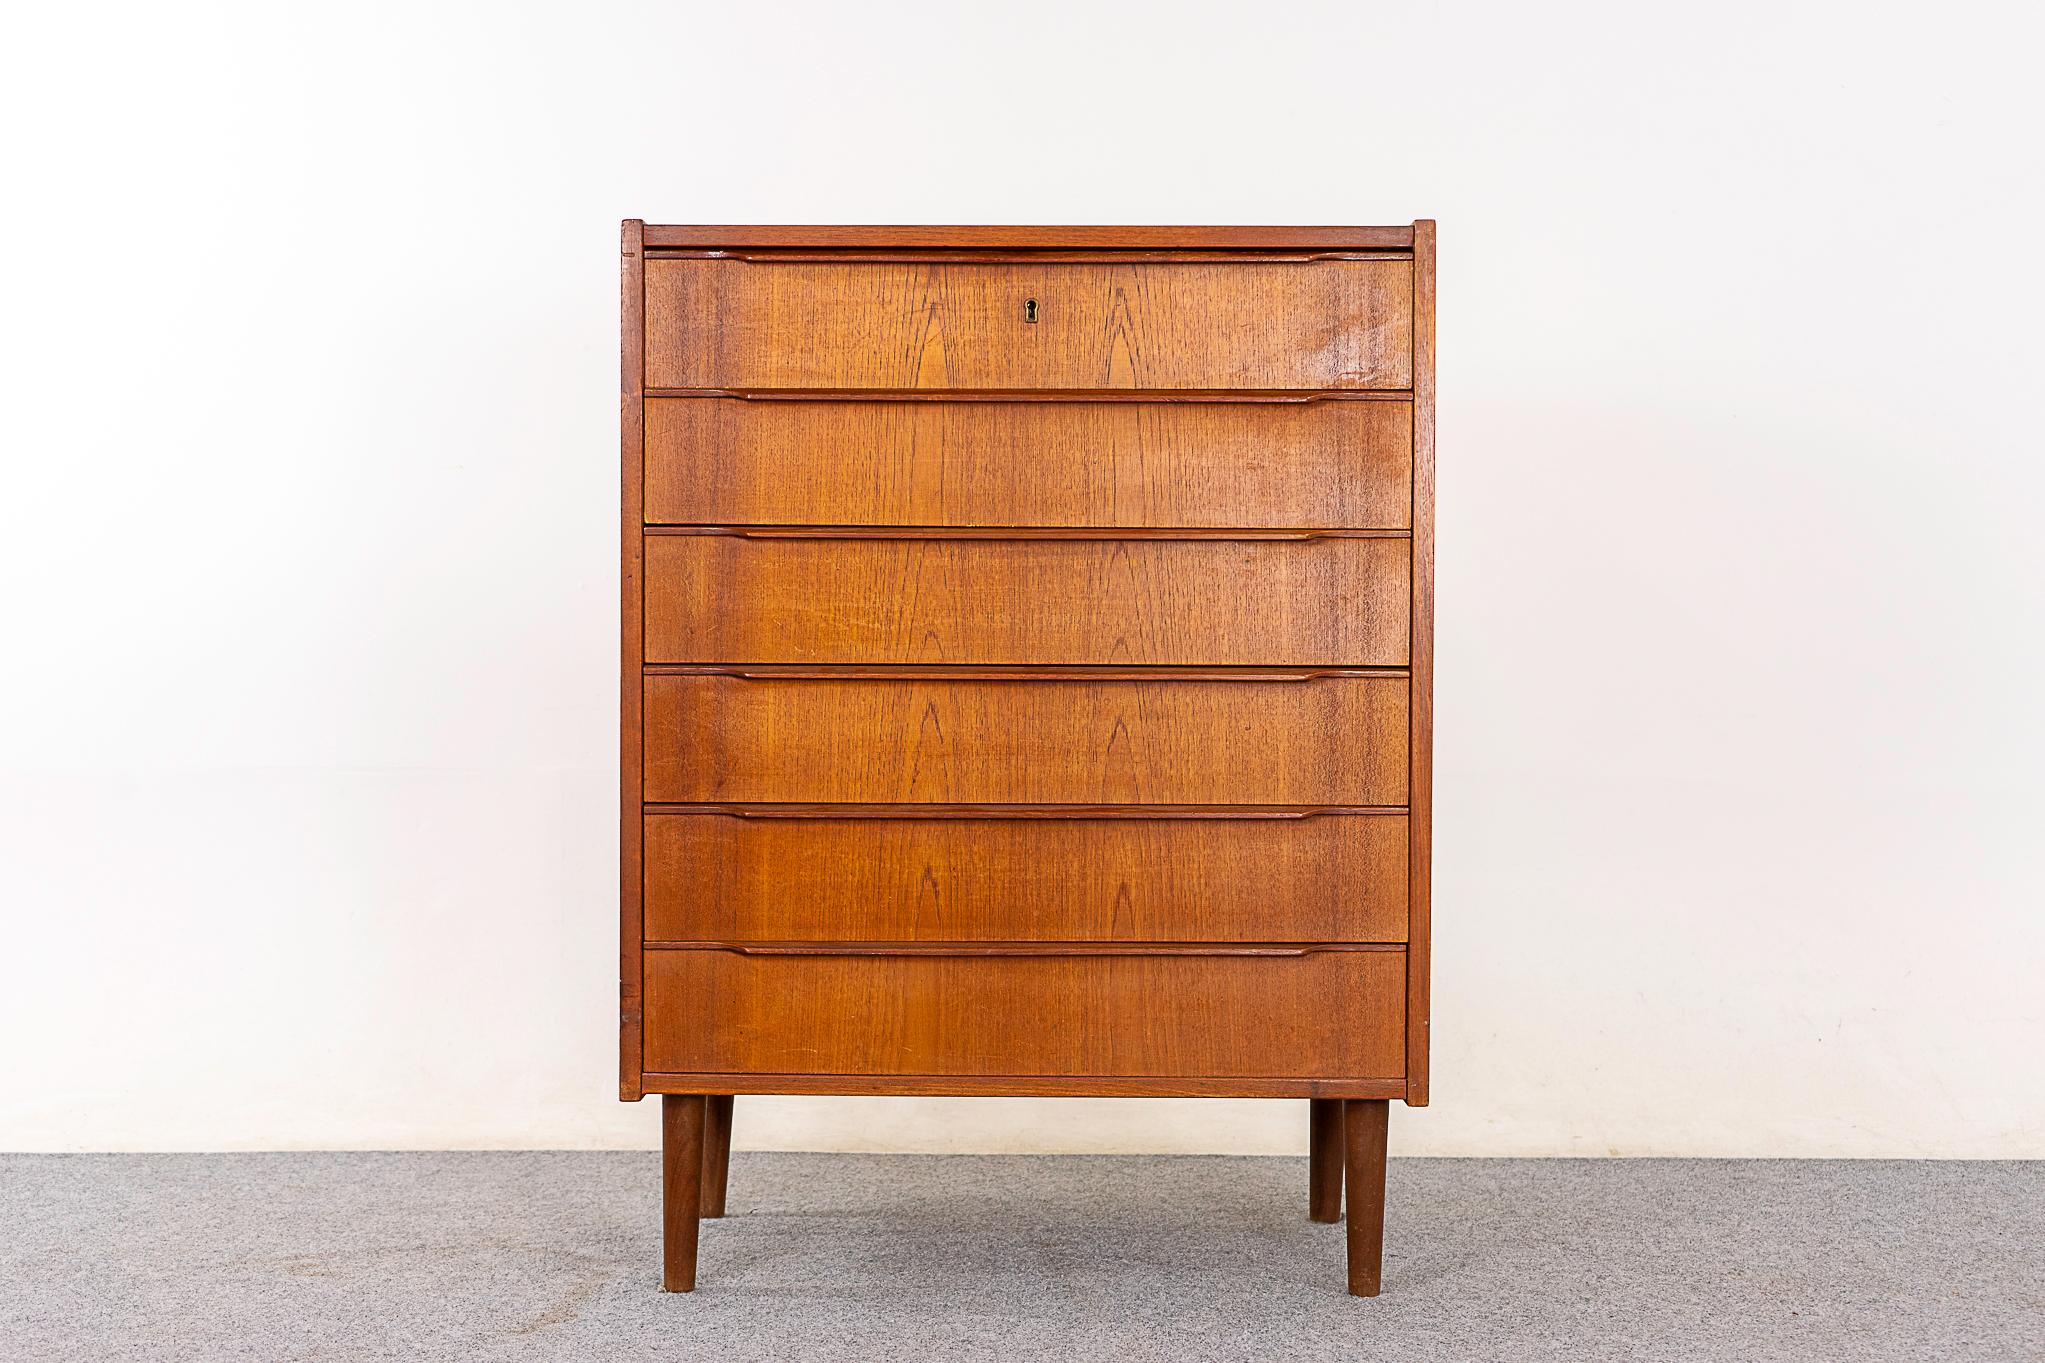 Teak Danish dresser, circa 1960's. Solid wood edging and book-matched veneer on all drawer faces. Dovetail constructed drawers with sleek integrated, horizontal finger pulls.

Unrestored item with option to purchase in restored condition for an